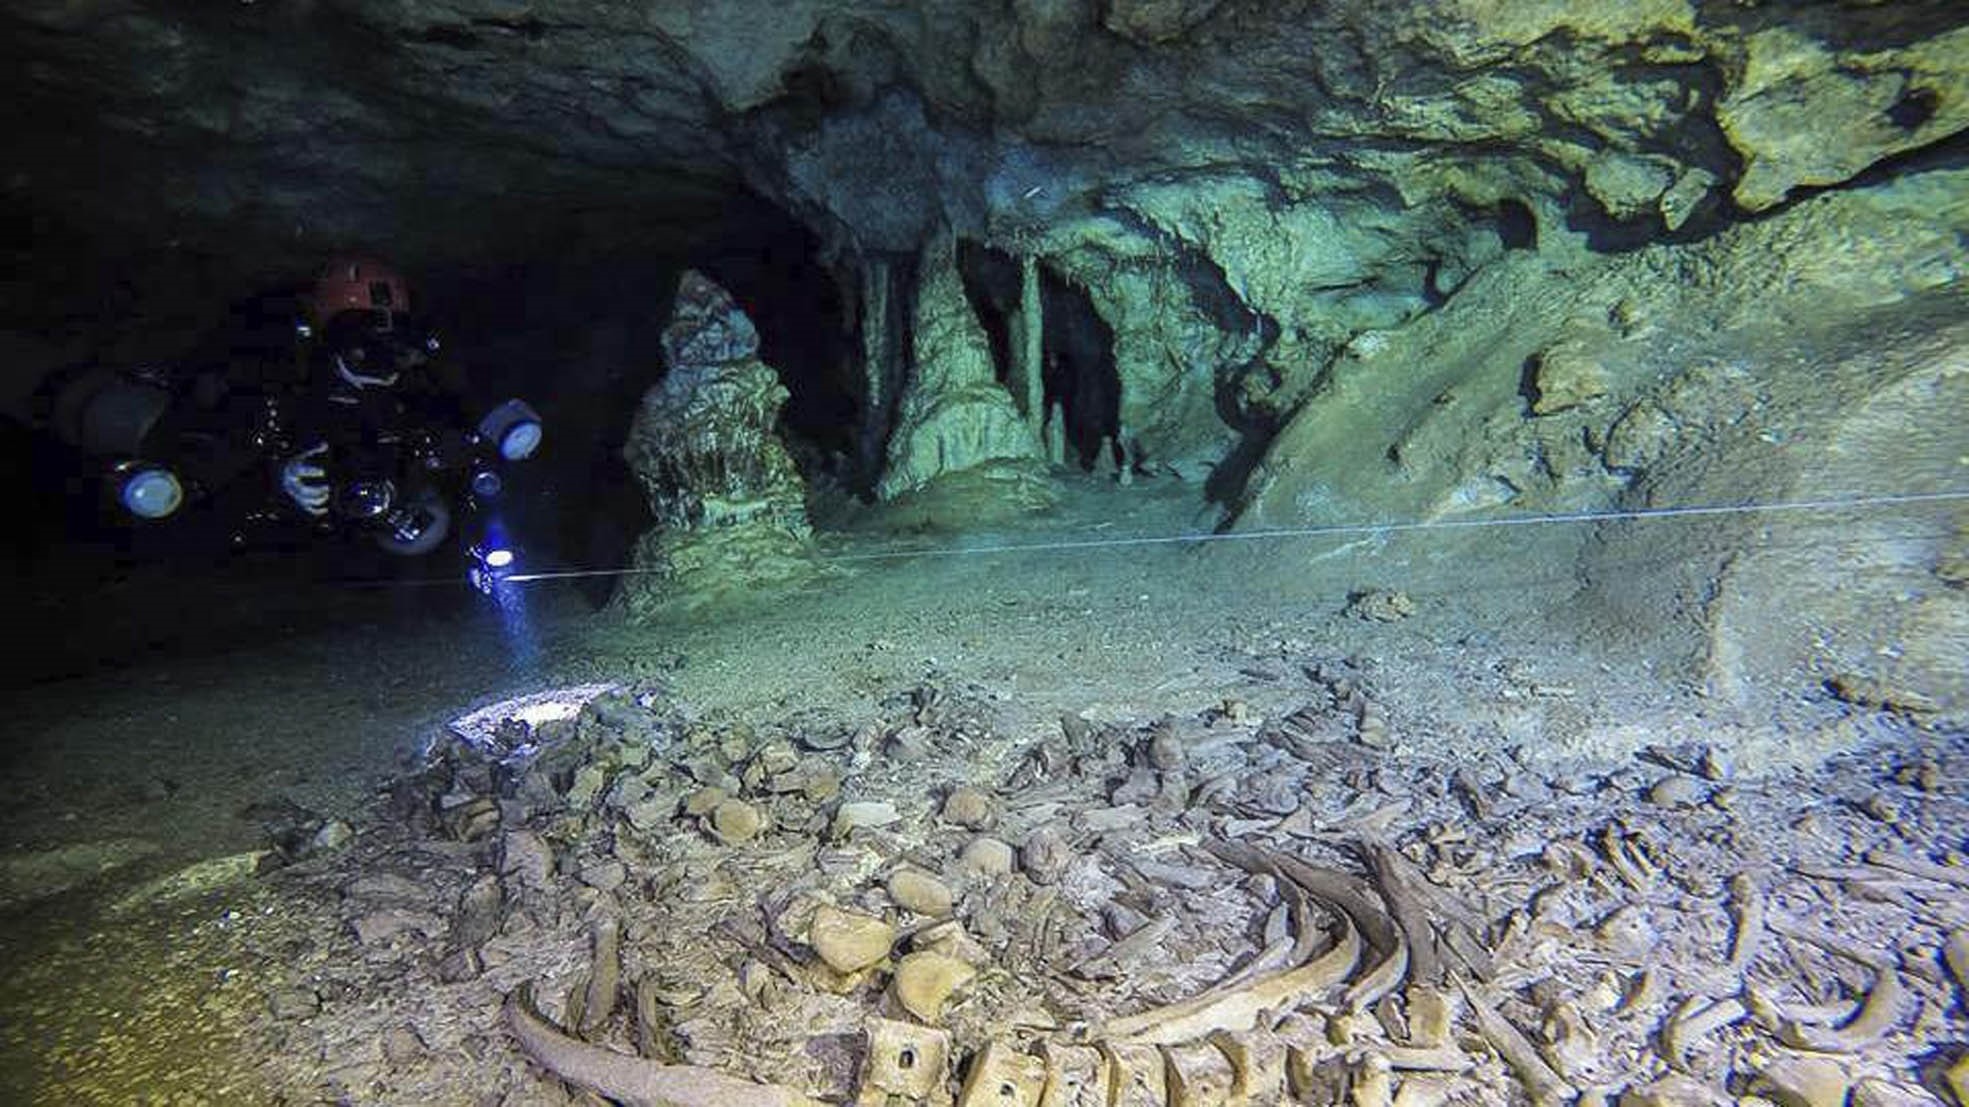 Divers explores the underwater cave system where human and animal remains have been found submerged in Mexico.